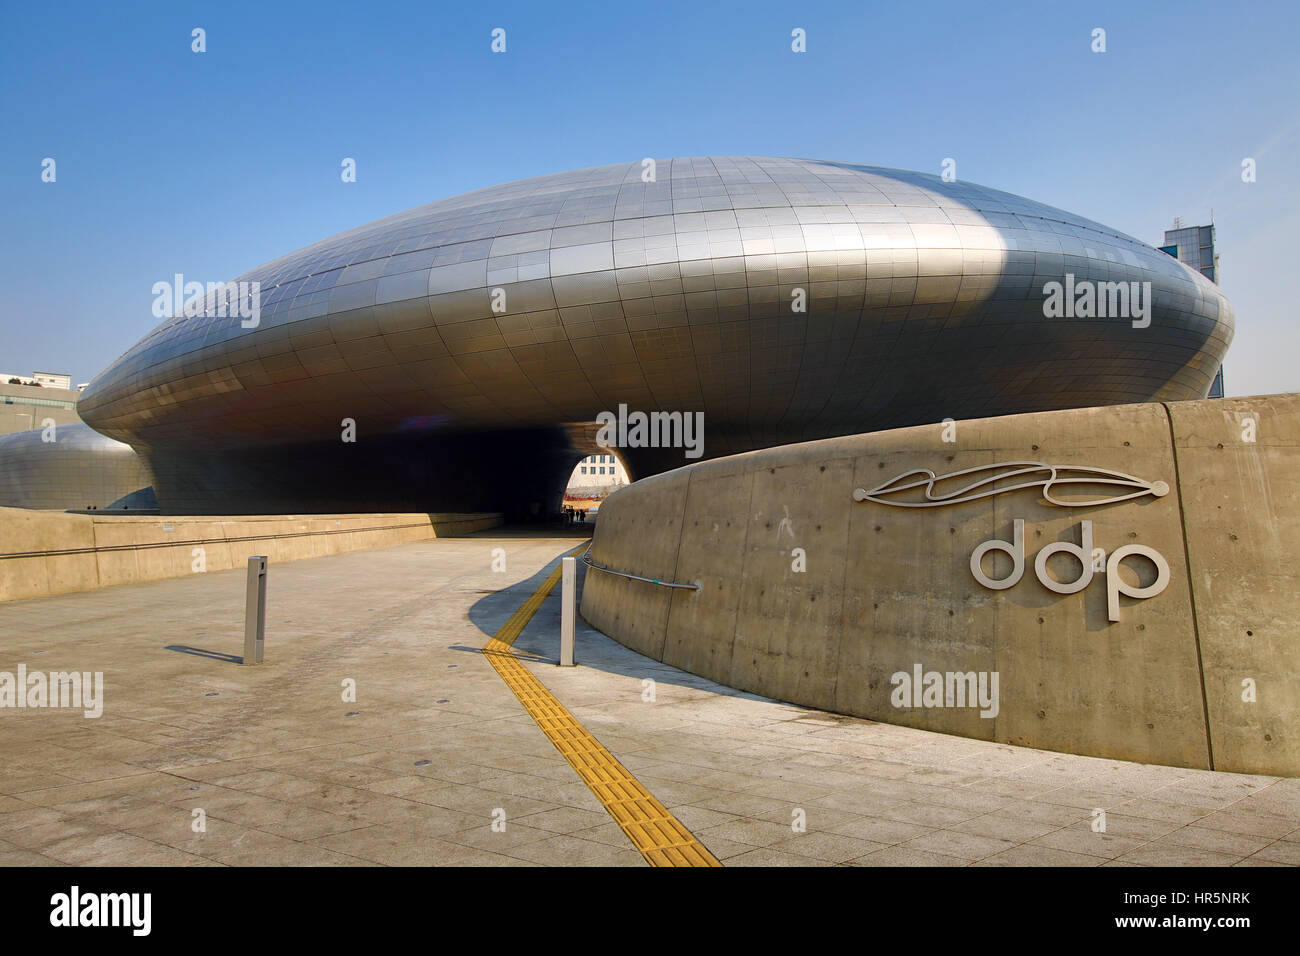 Modern architecture of the Dongdaemun Design Plaza and Culture Park (DDP) in Seoul, Korea Stock Photo